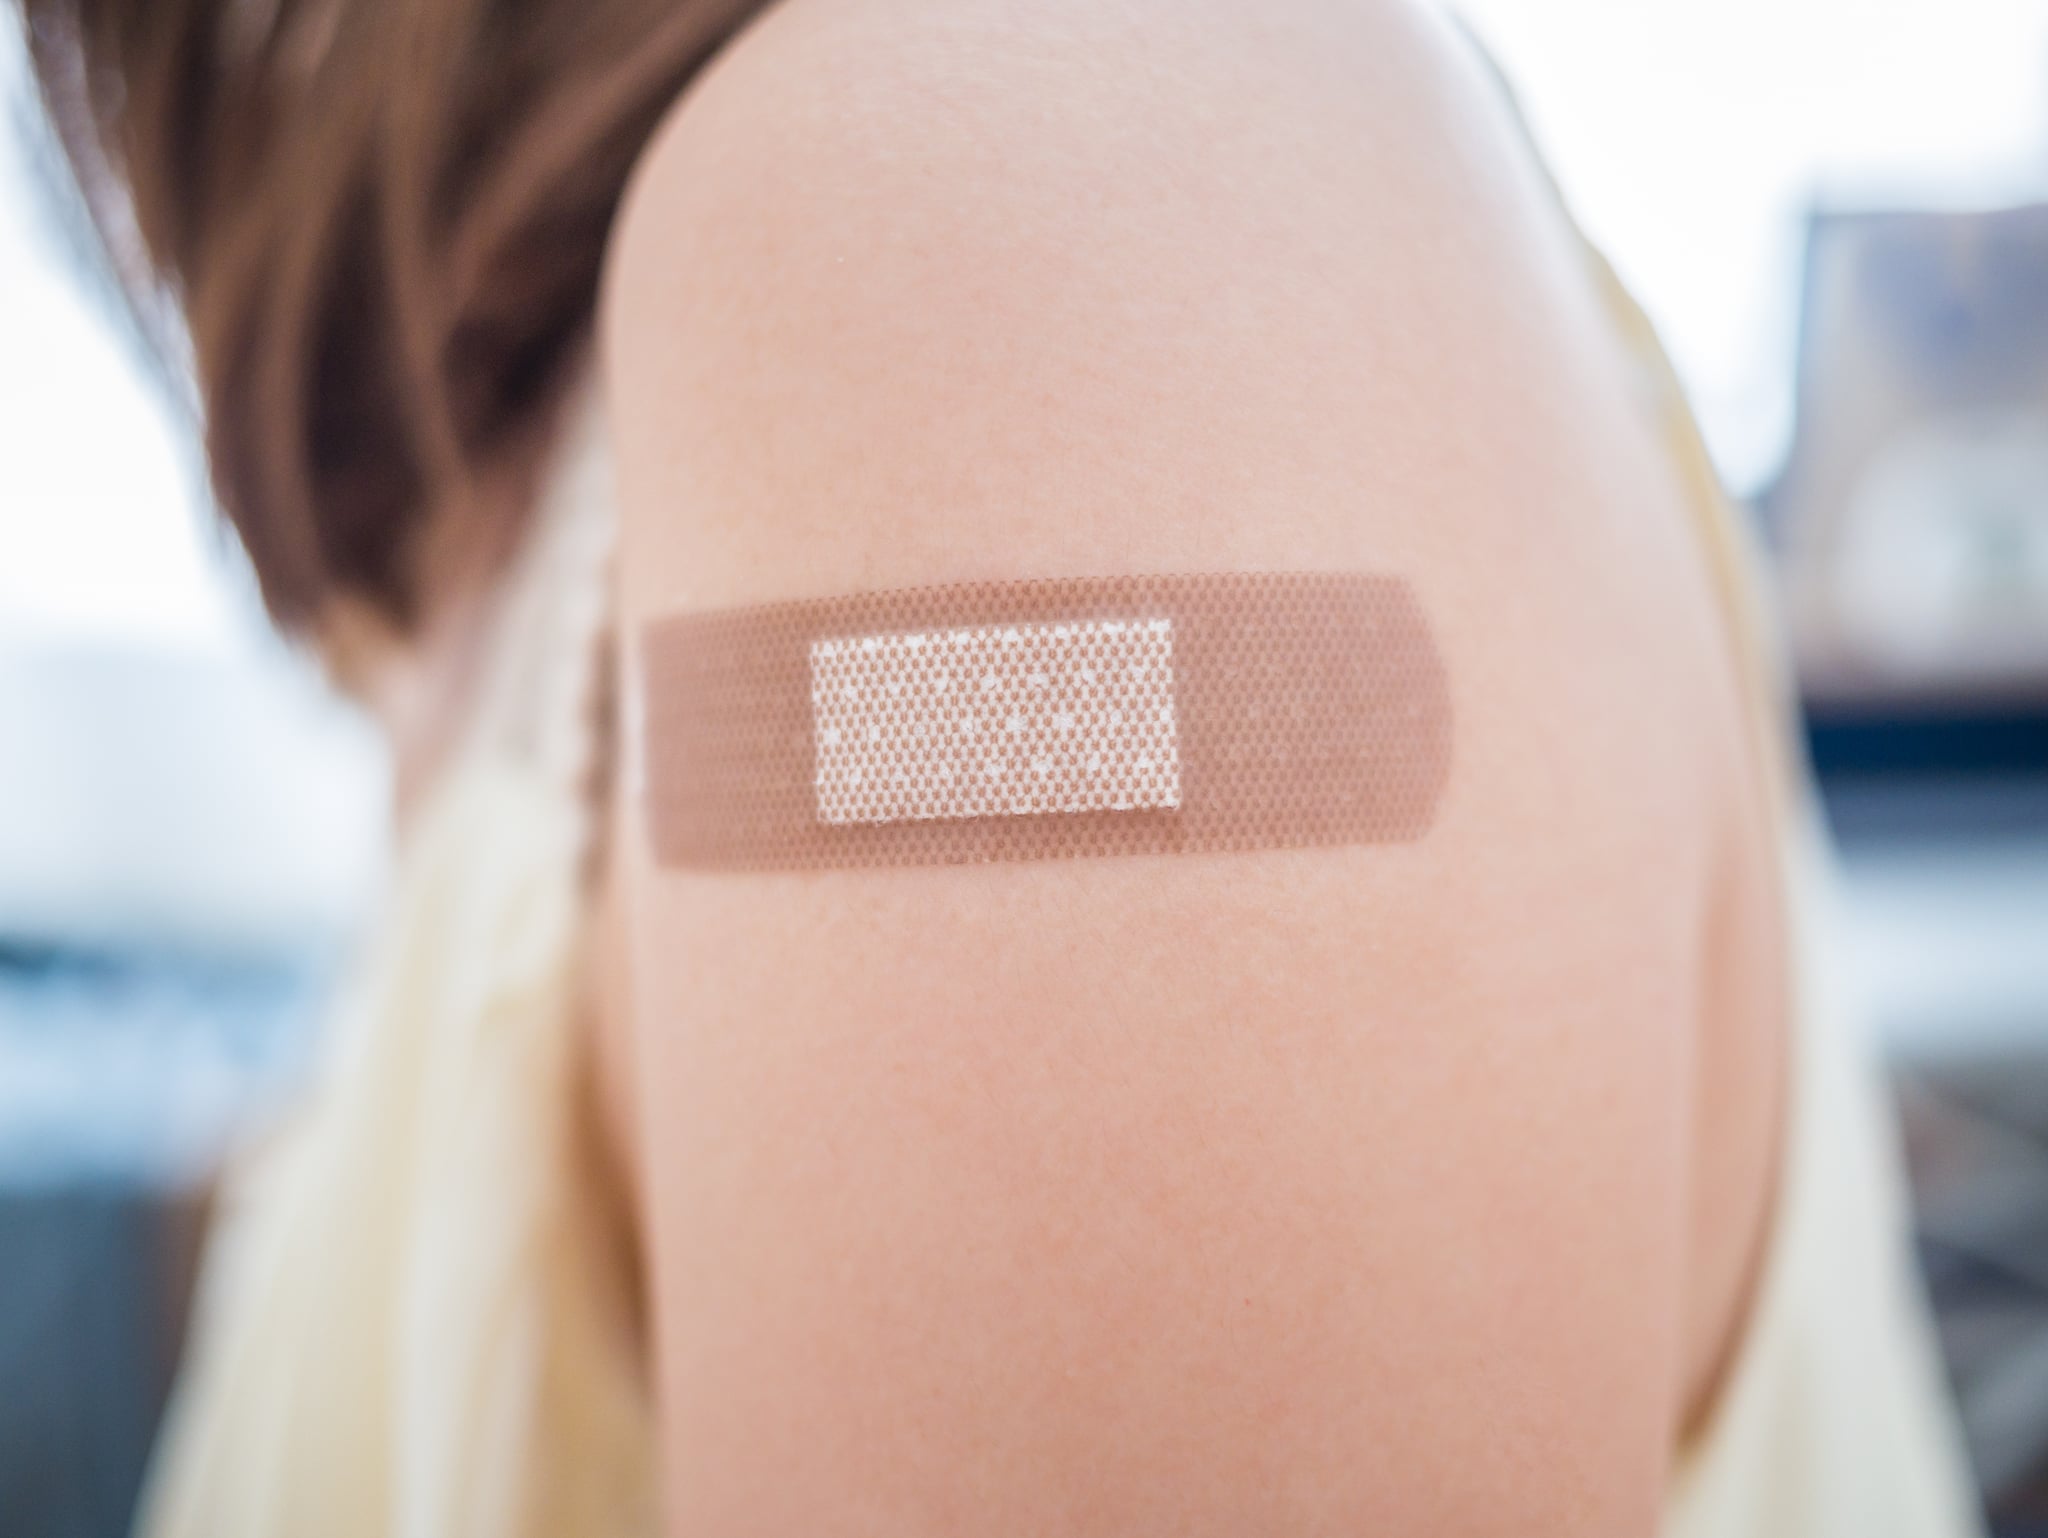 Adhesive bandage on a female arm after vaccination